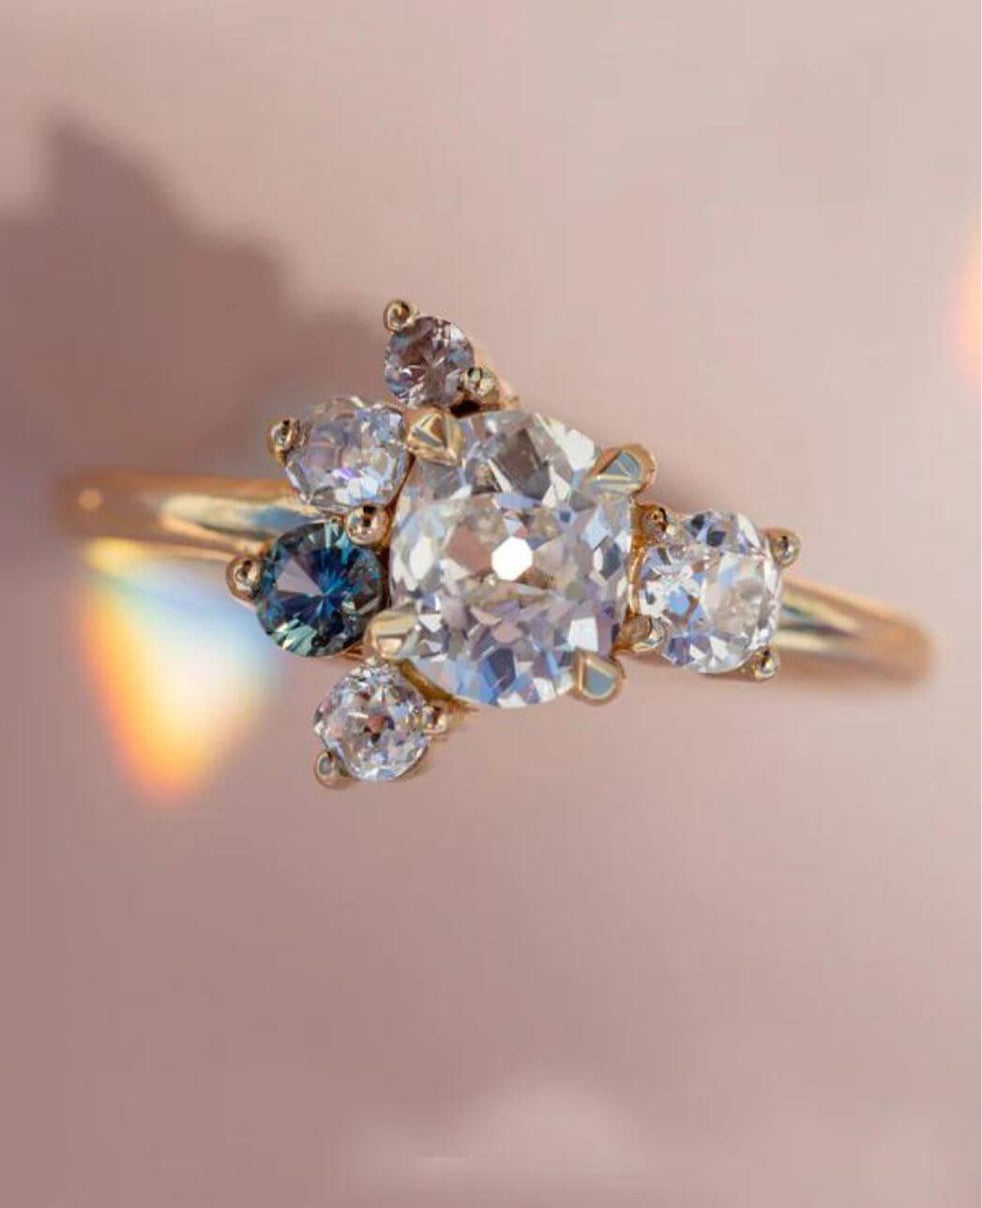 flat lay image of an heirloom rework cluster ring, featuring diamonds and sapphires